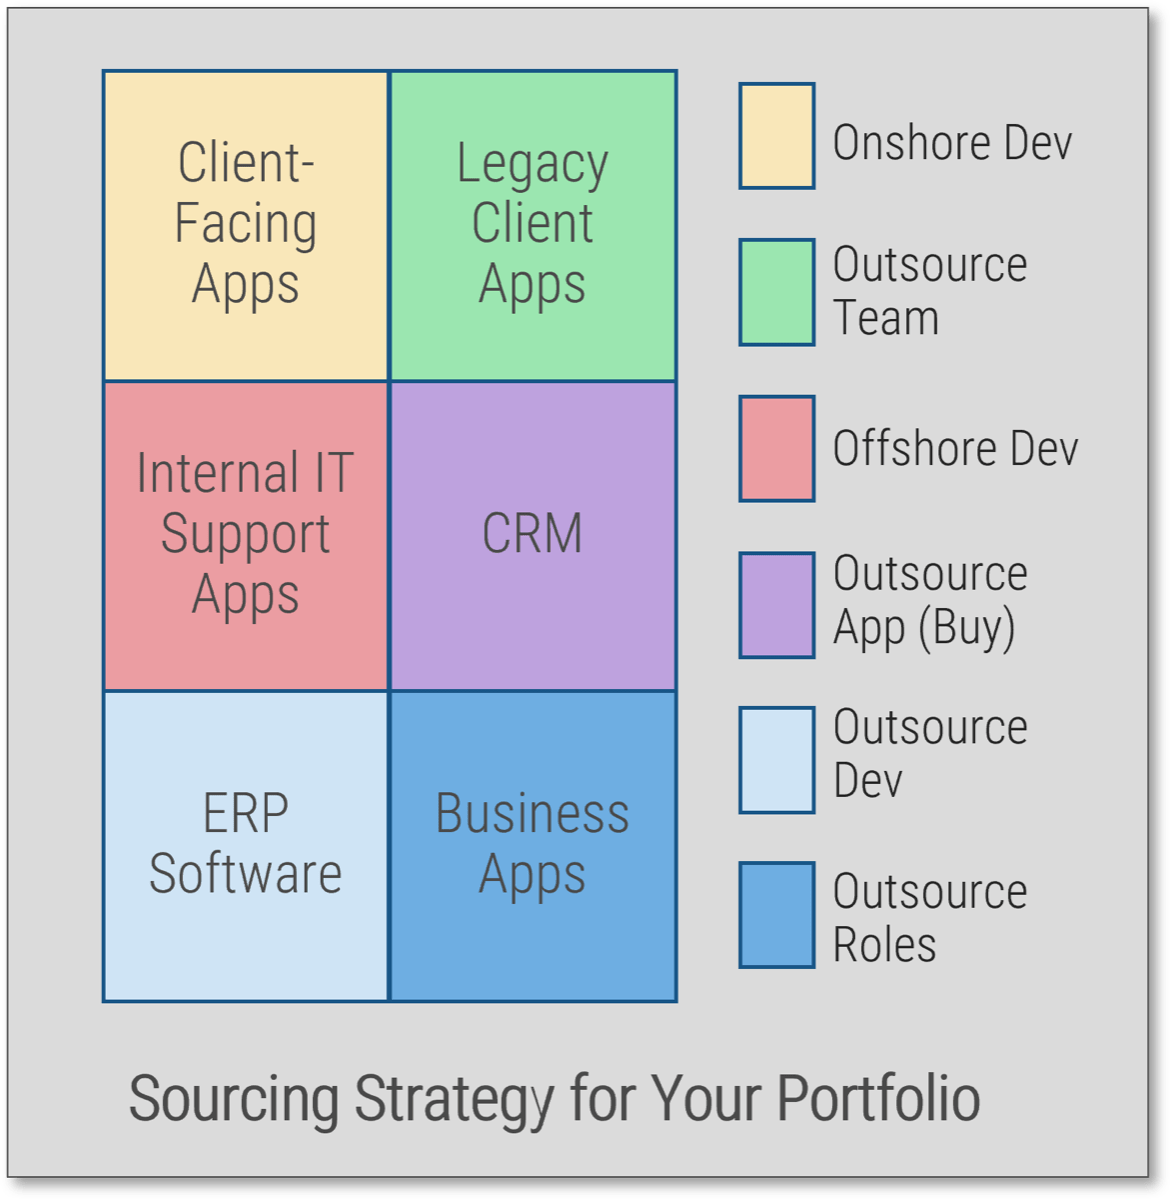 Example 'Sourcing Strategy for Your Portfolio' with initiatives like 'Client-Facing Apps' and 'ERP Software' assigned to 'Onshore Dev', 'Outsource Team', 'Offshore Dev', 'Outsource App (Buy)', 'Outsource Dev', or 'Outsource Roles'.